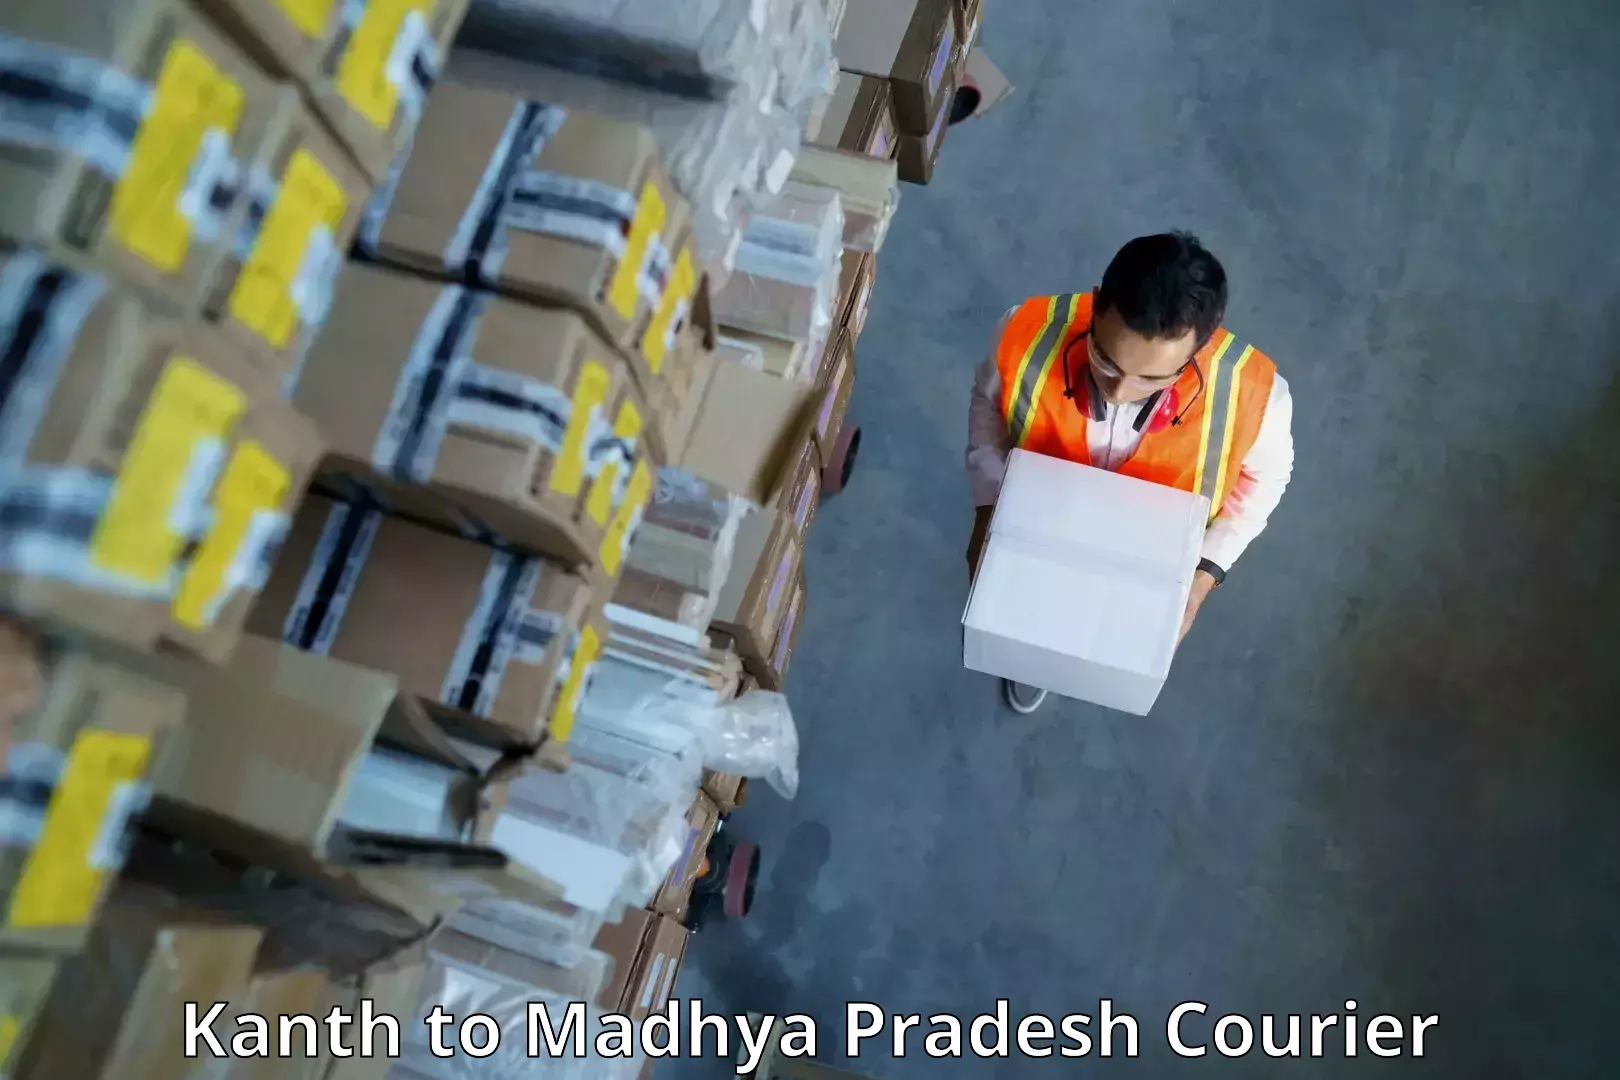 Courier service efficiency Kanth to Chhindwara